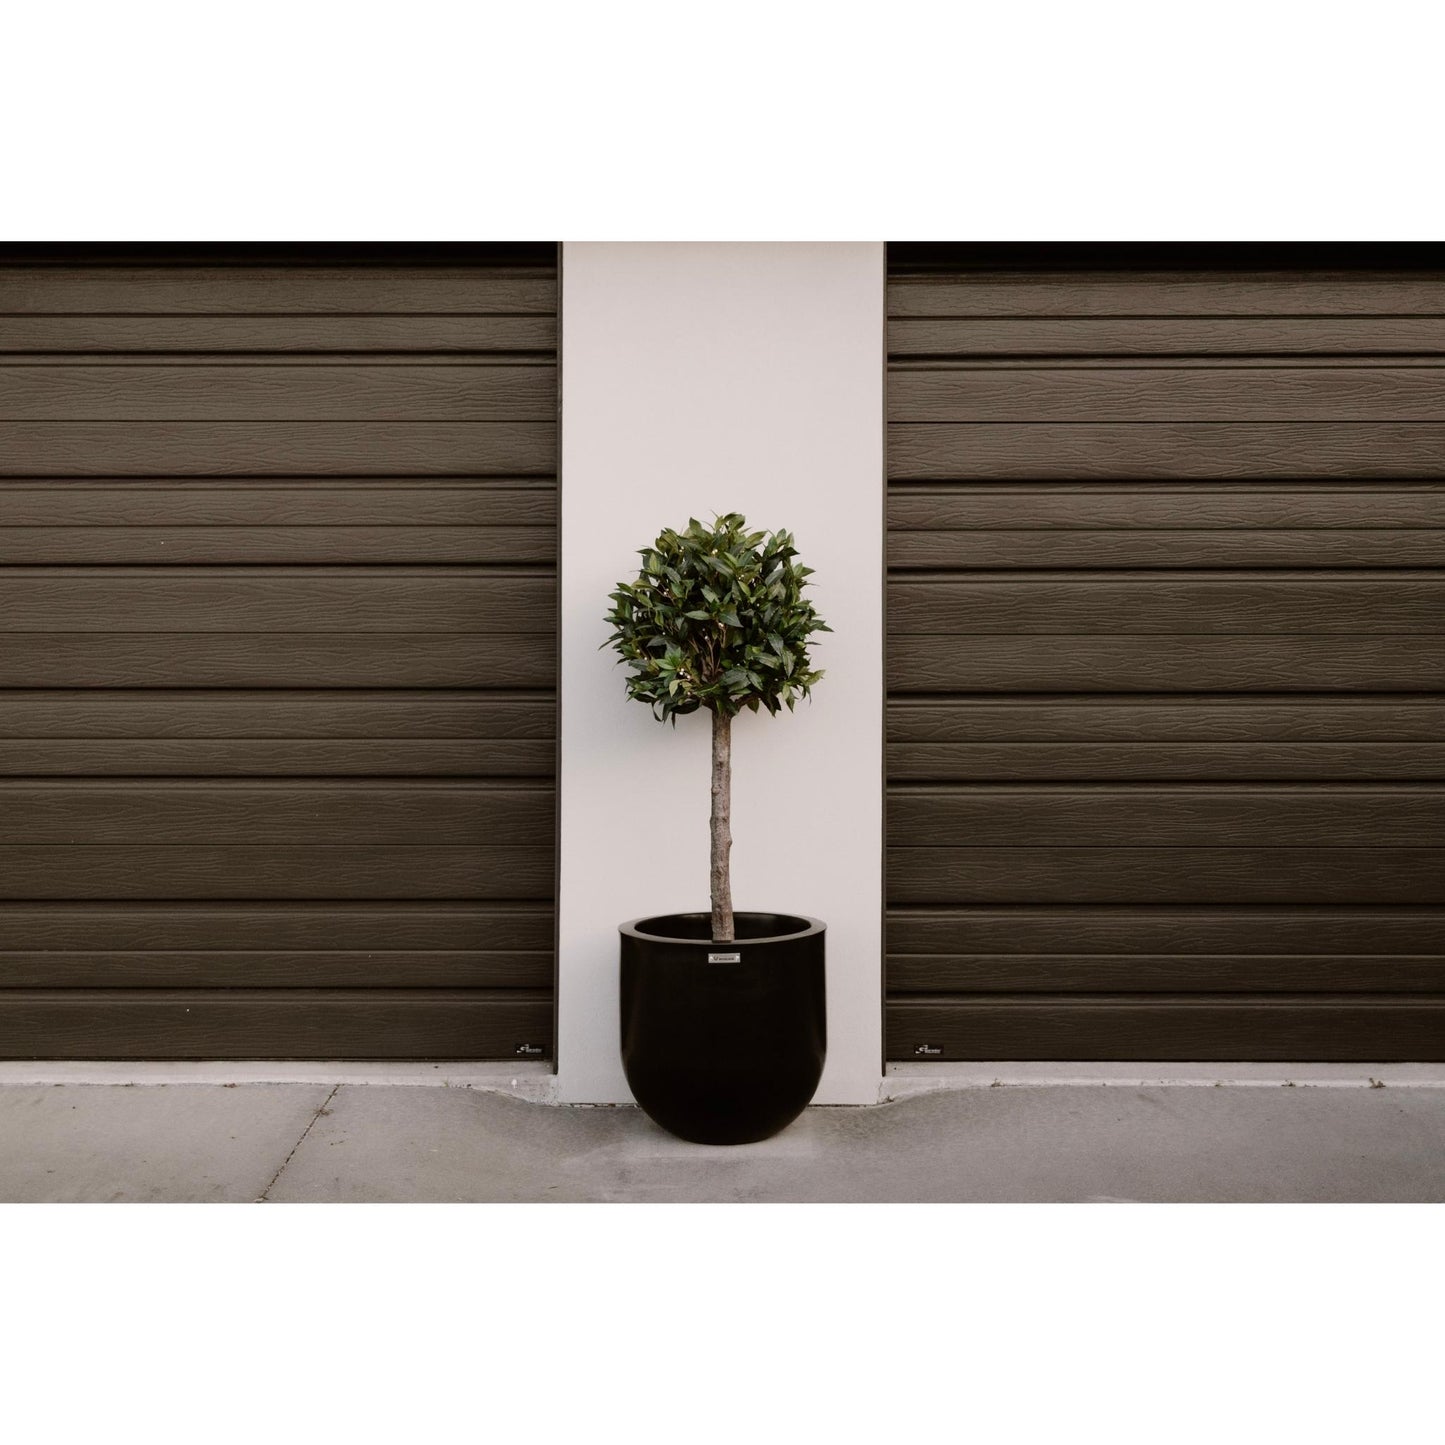 A Modscene planter in black situated between the garage doors of a house.